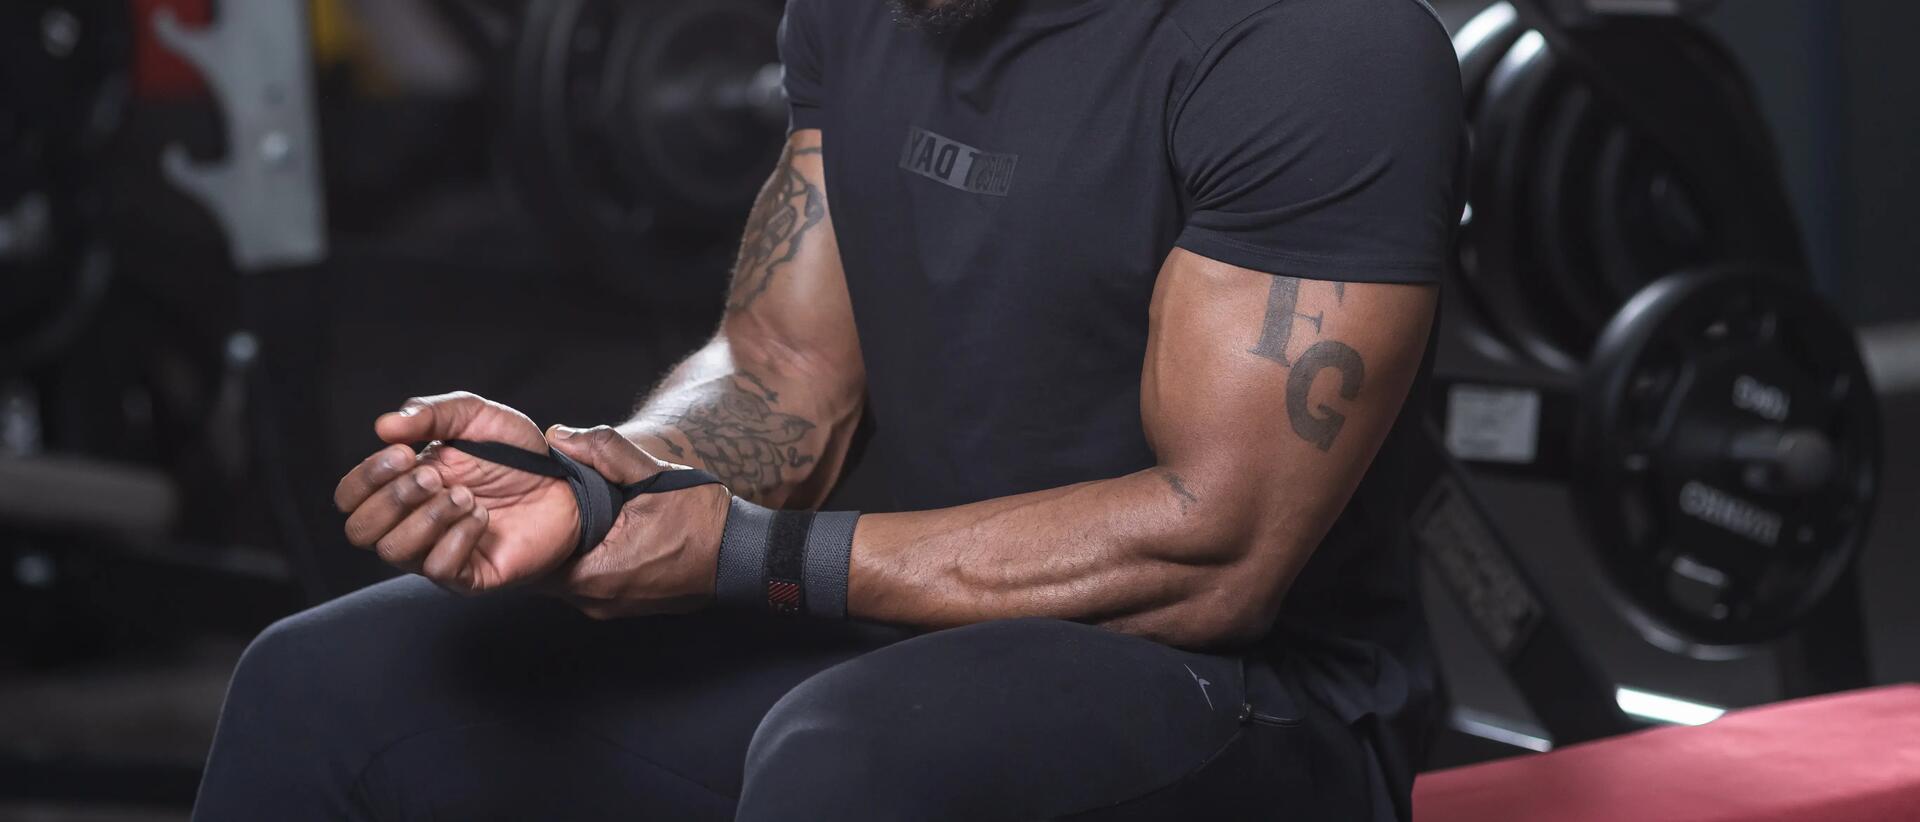 Man wrapping wrist in gym